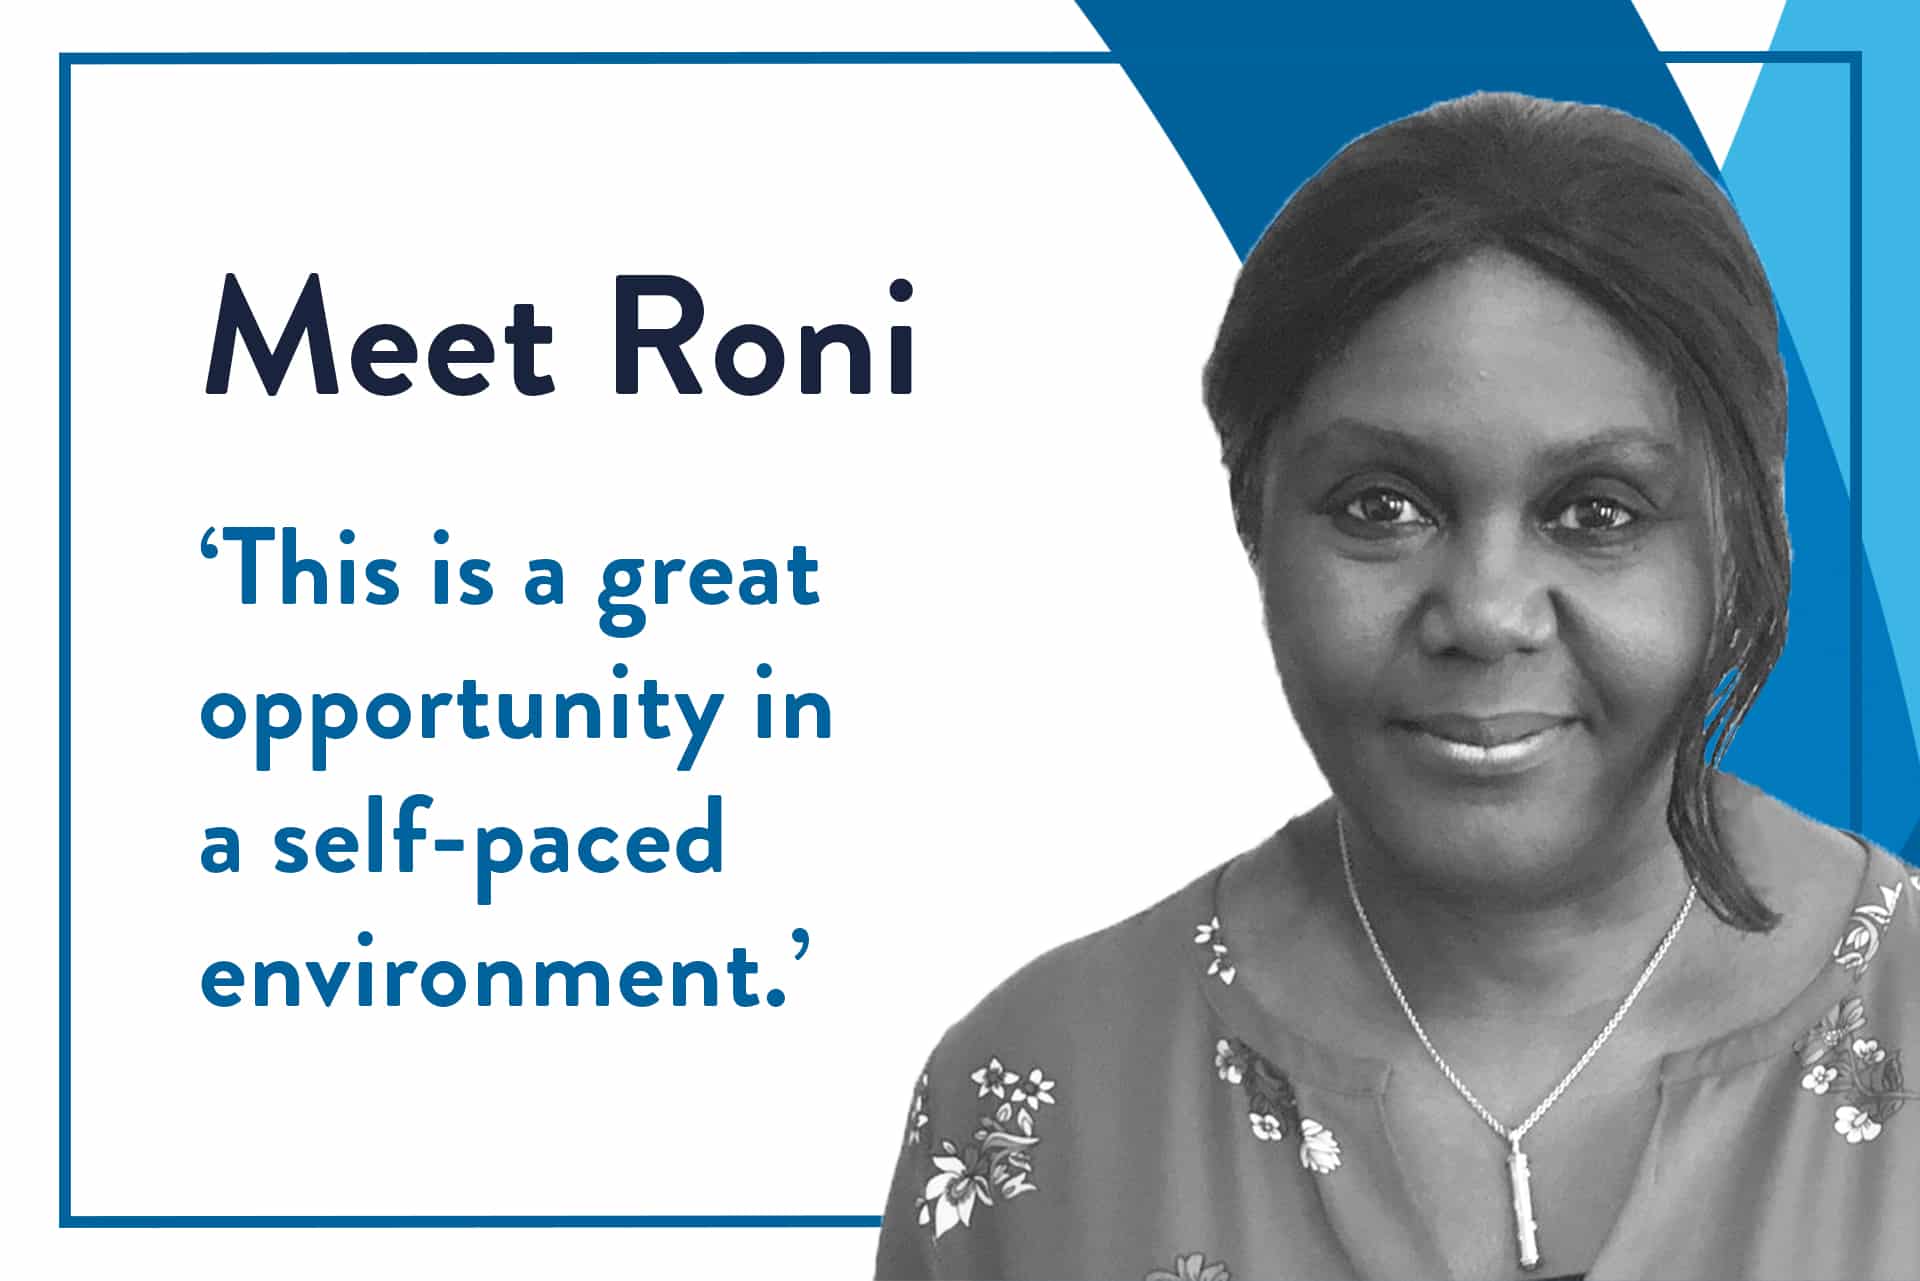 Blog header image of Roni who is a past student. Next to Roni is the text 'Meet Roni' and a quote from the testimonial.